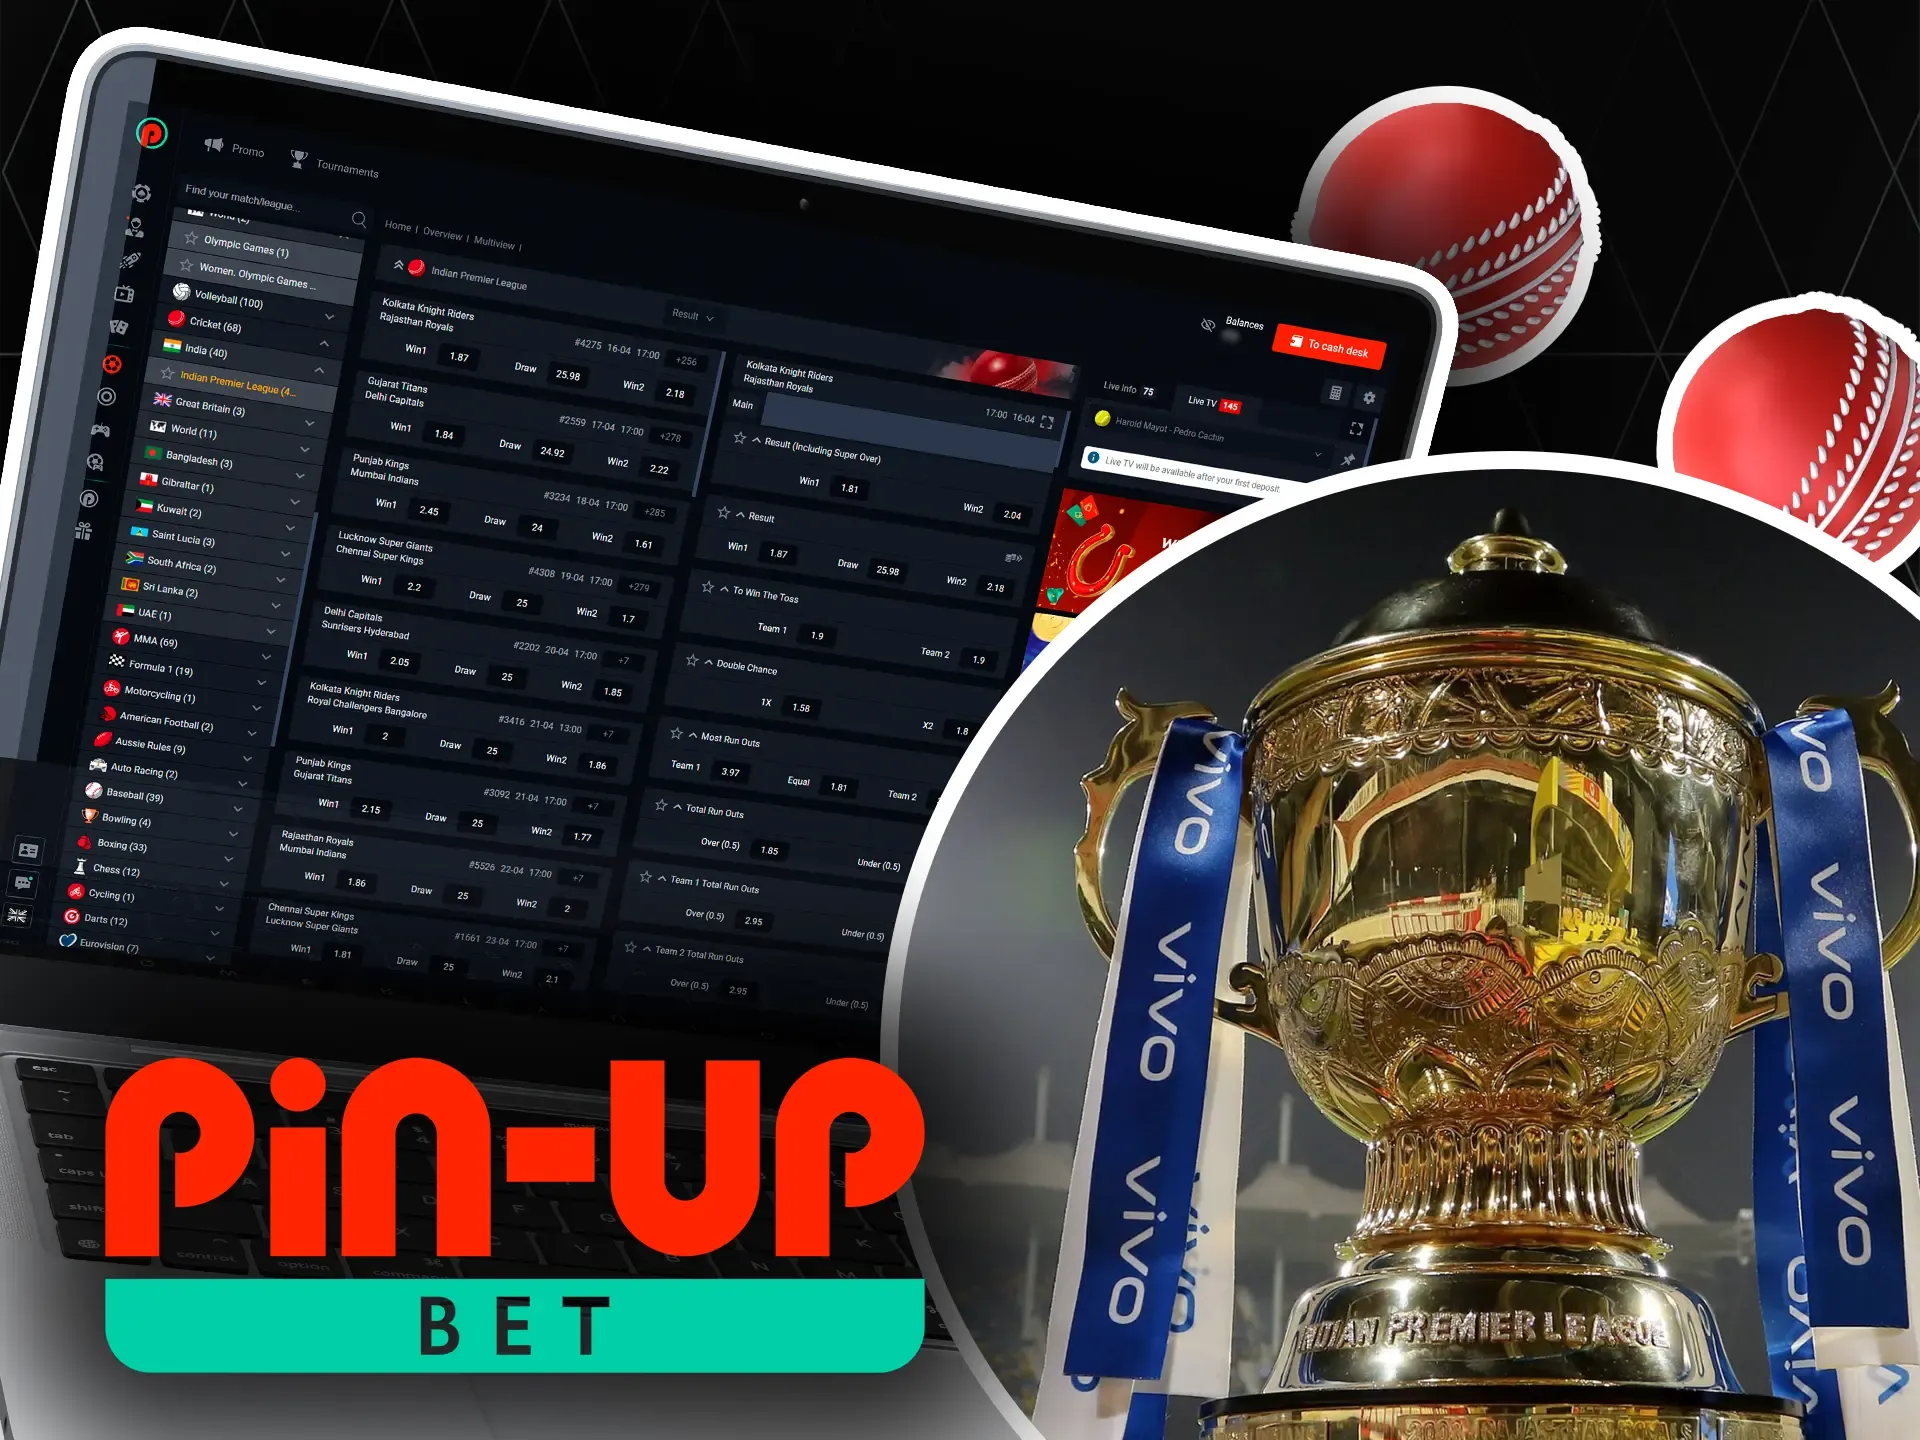 All the IPL amateurs can place bets on this league in the Pin-Up sportsbook.